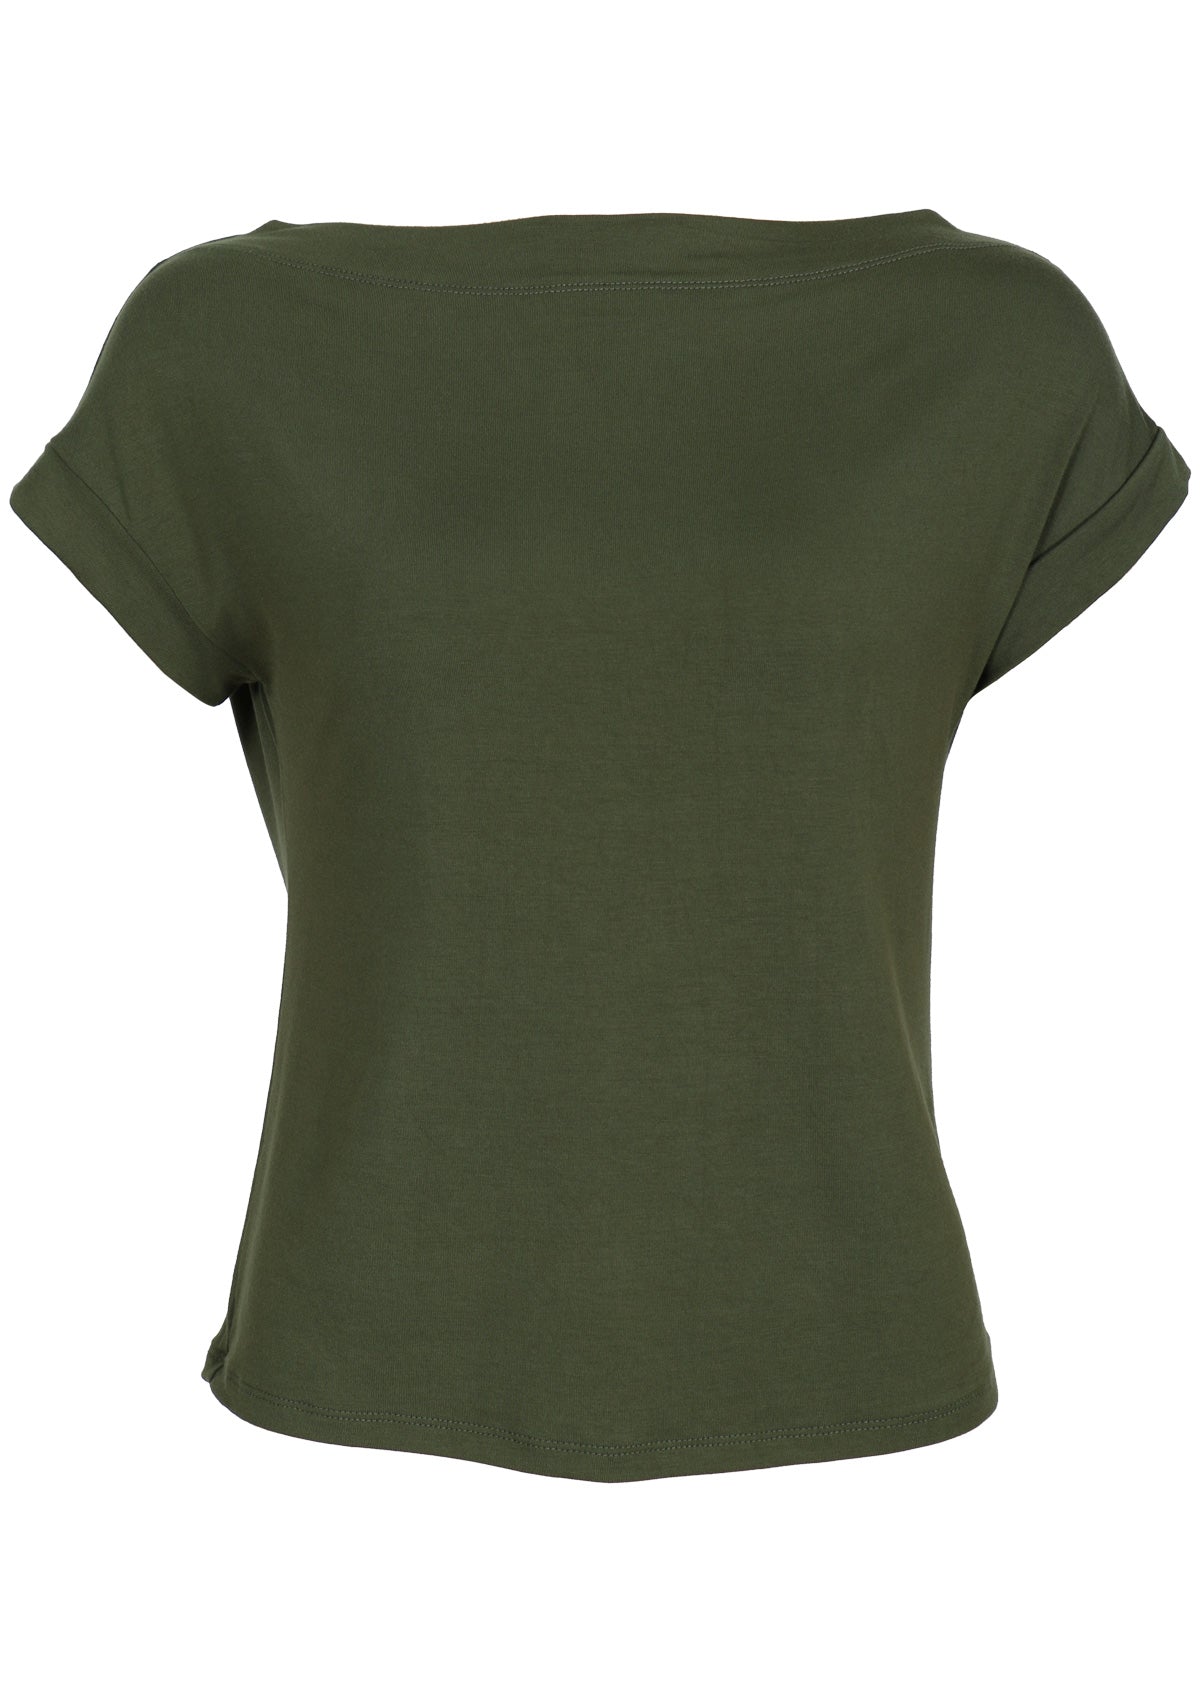 Front view of women's wide neck mod olive green stretch rayon boat neck top